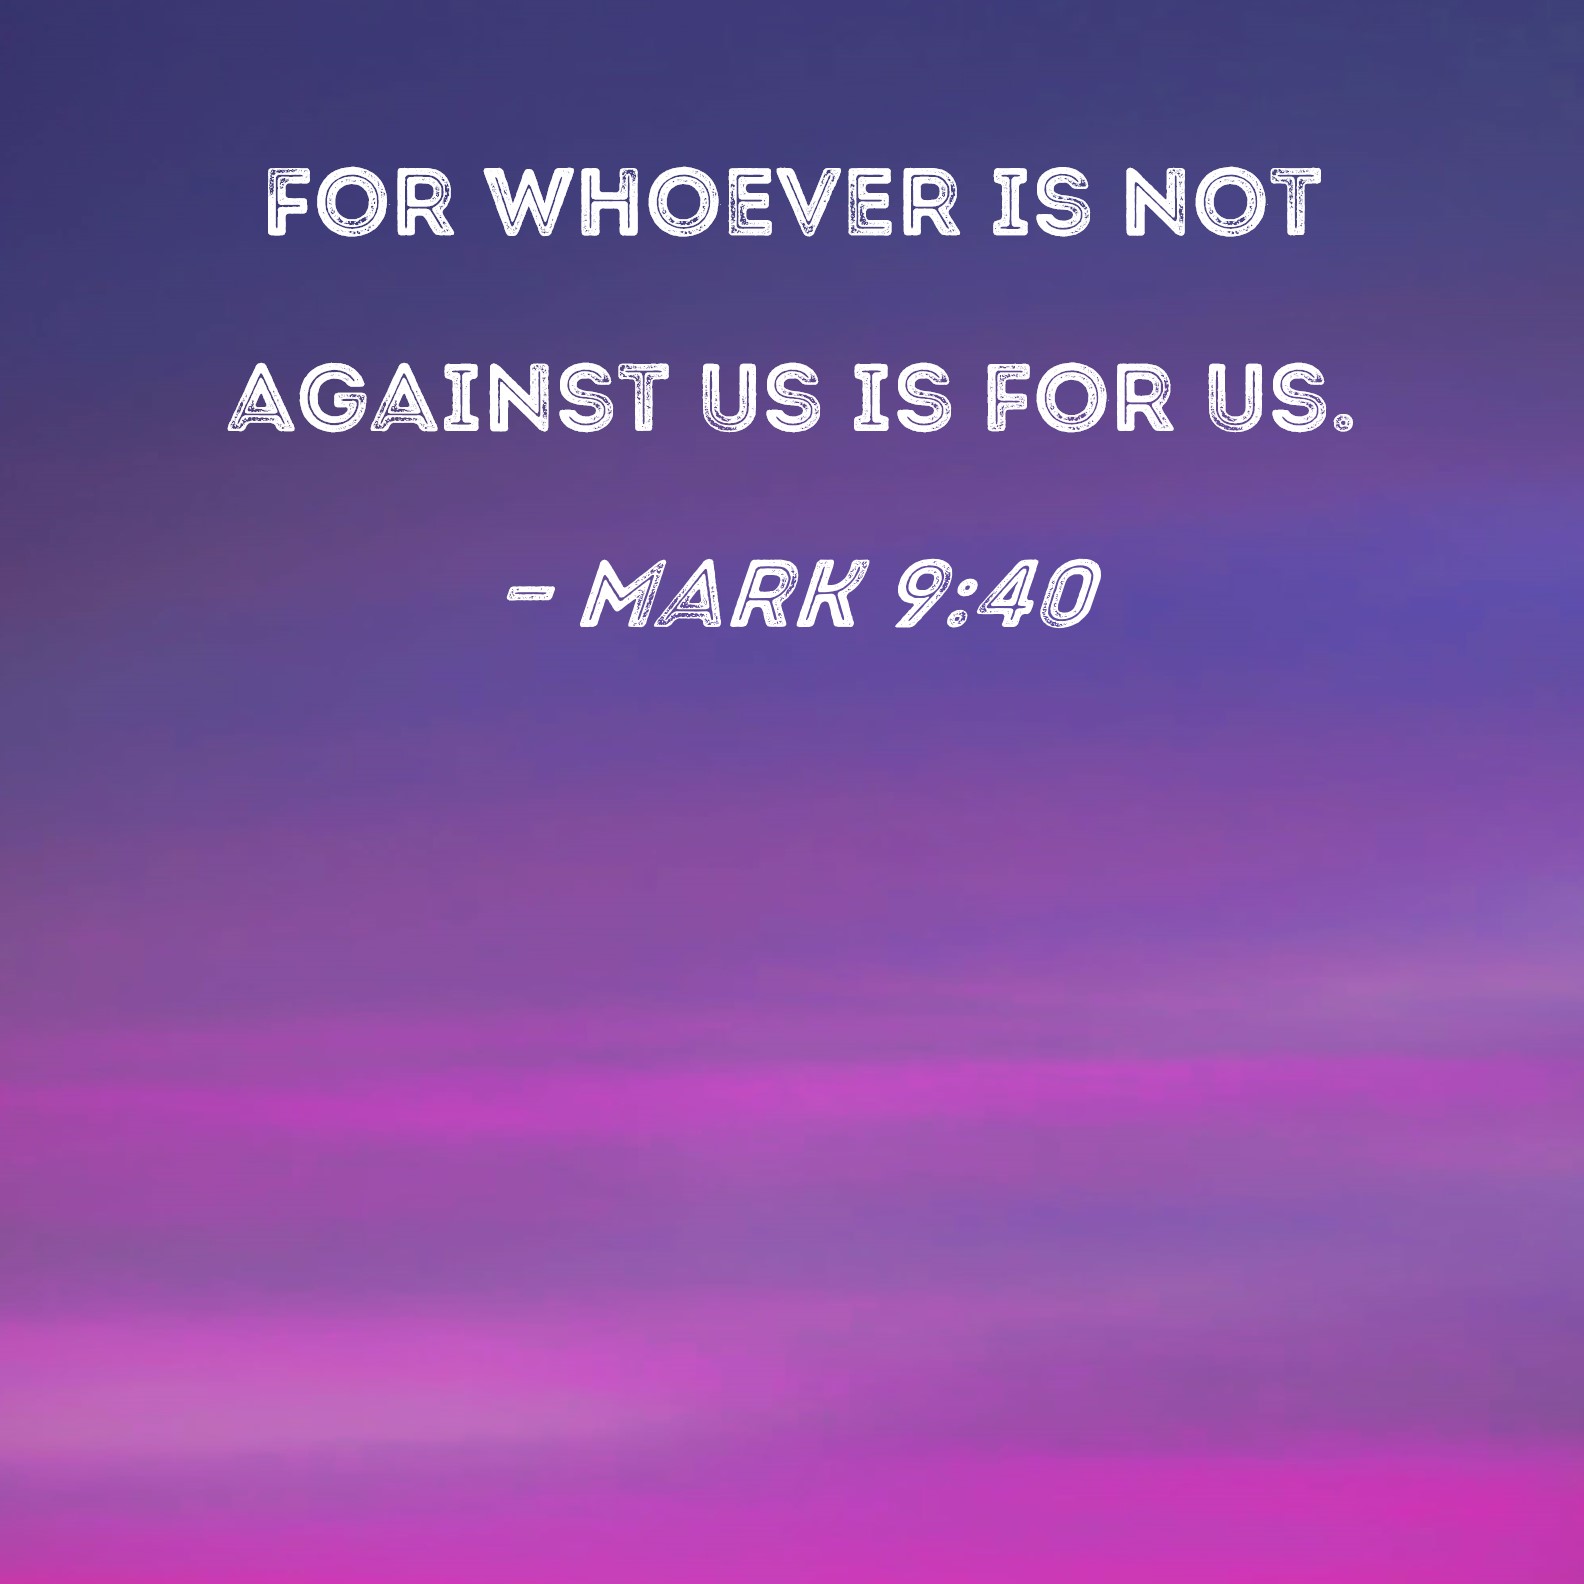 Mark 9:40 For whoever is not against us is for us.